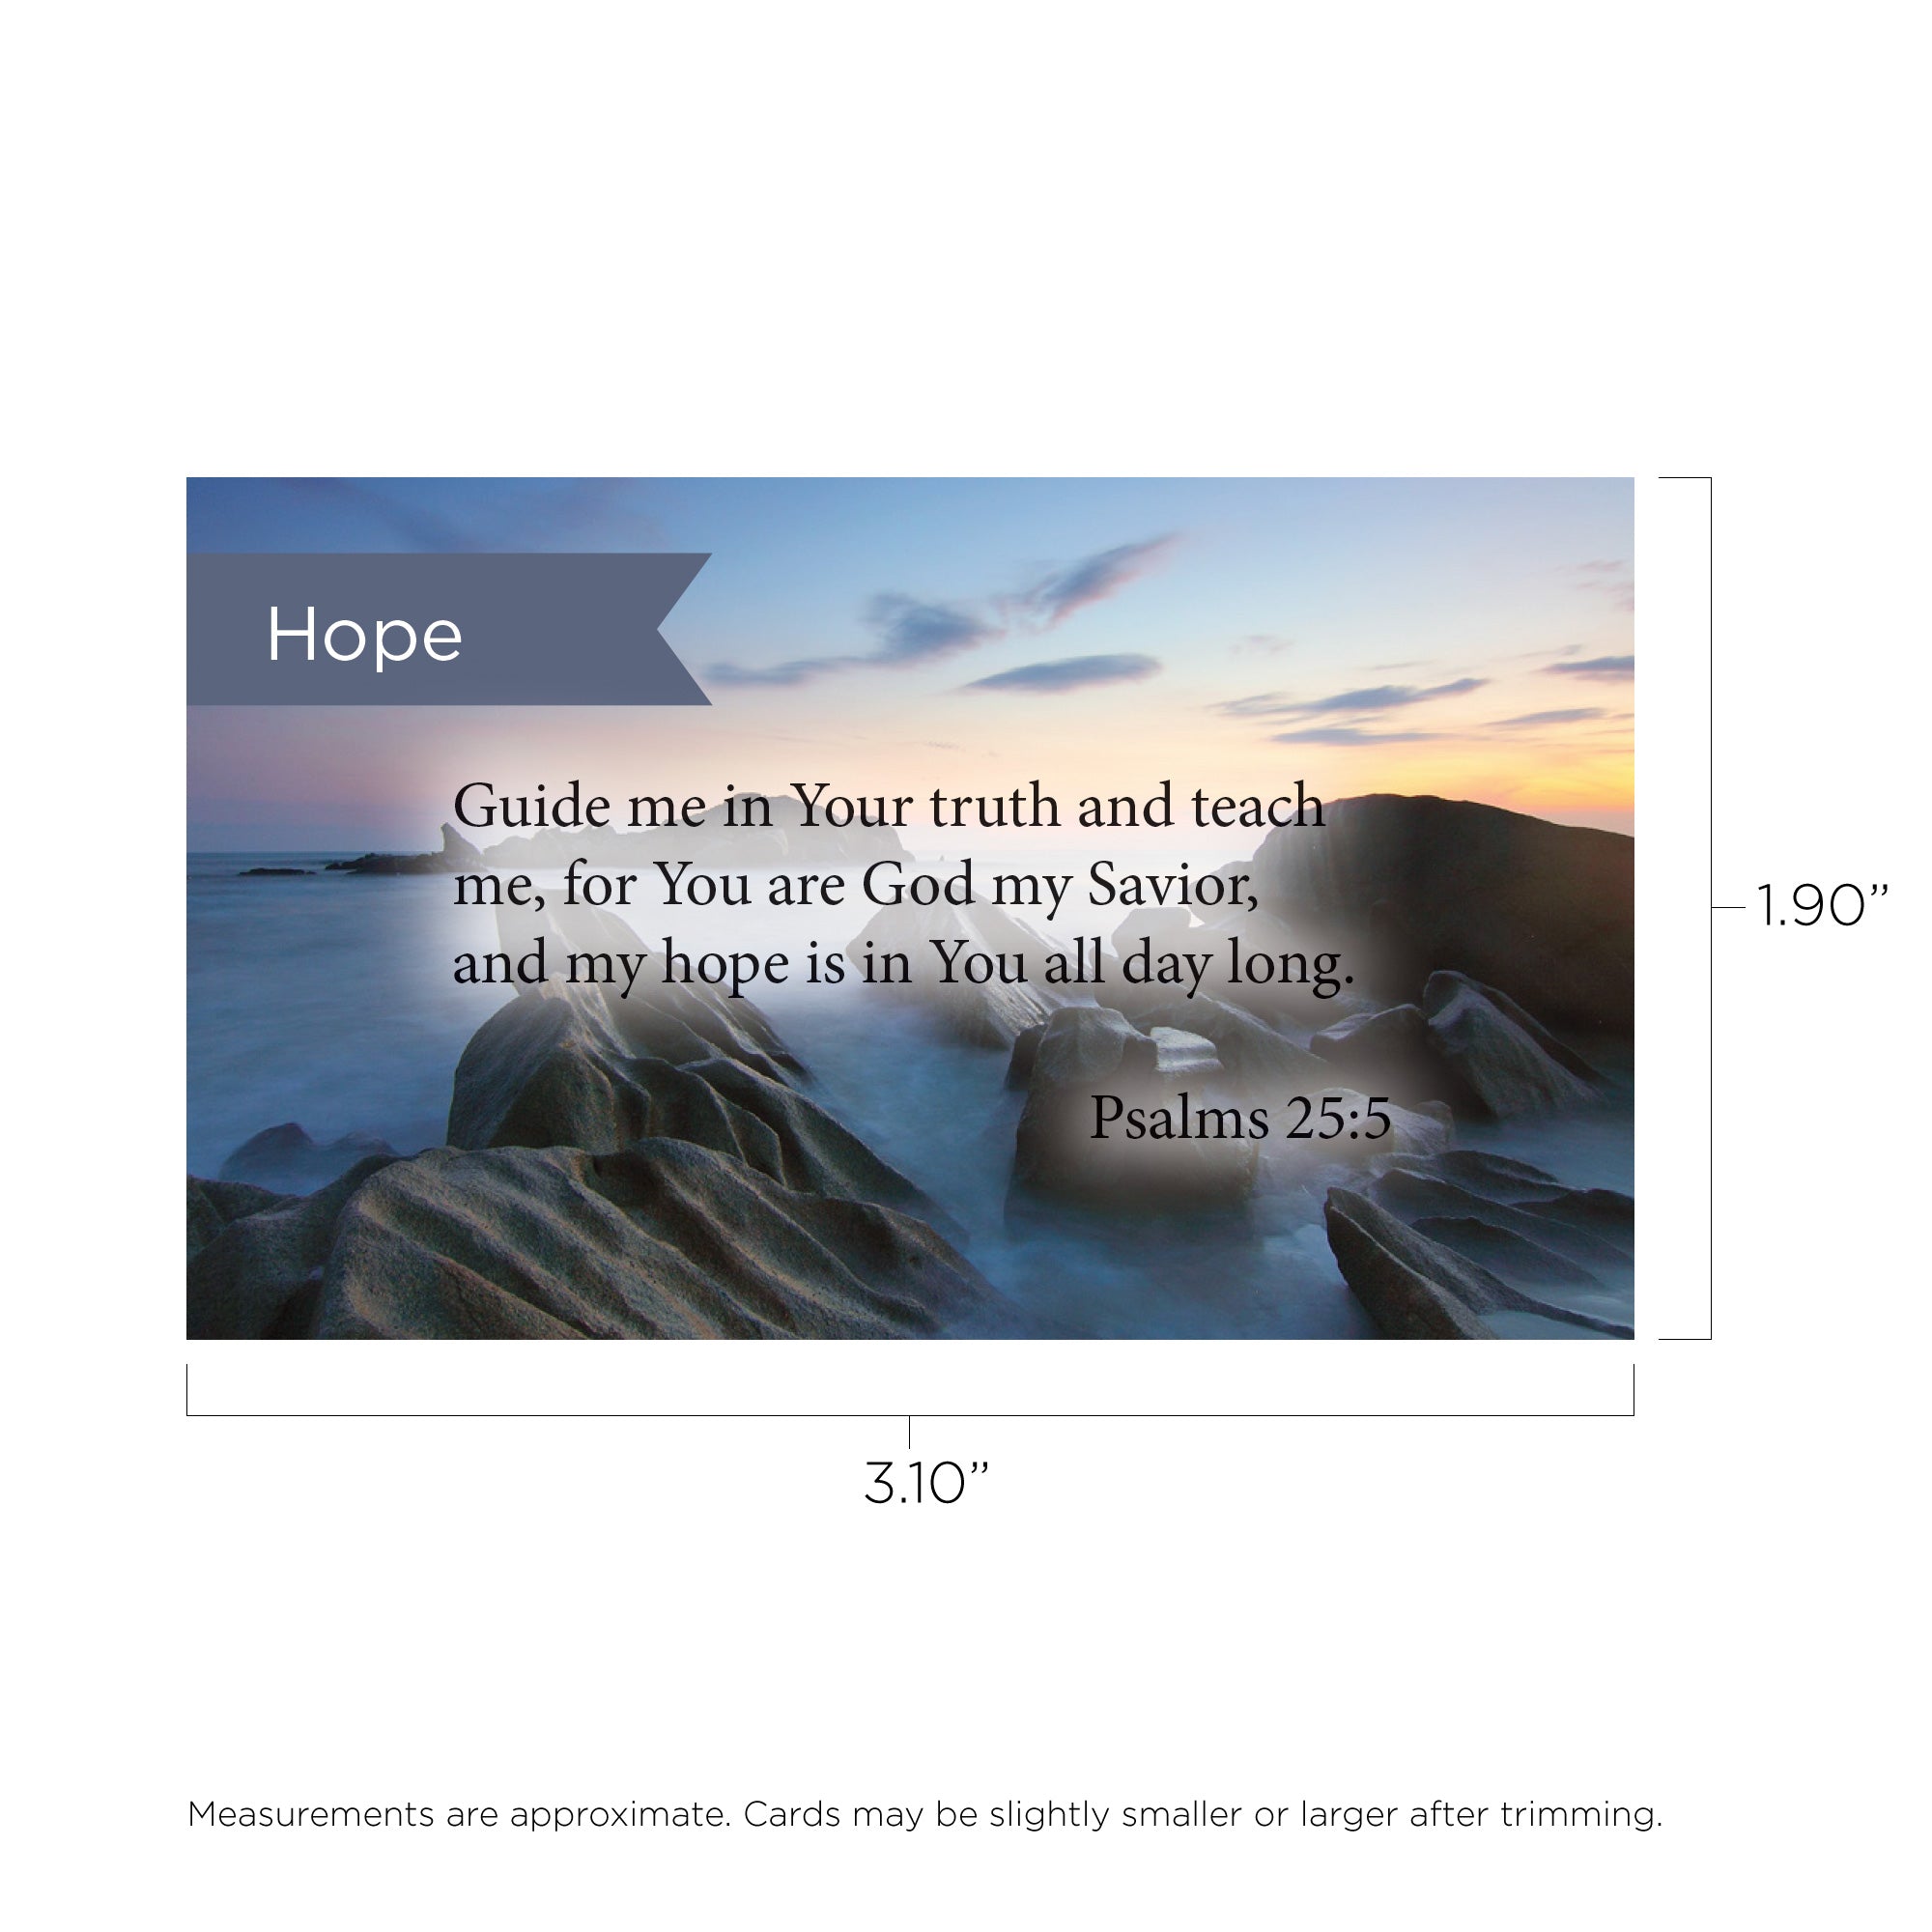 Hope, Guide Me, Psalms 25:5, Pass Along Scripture Cards, Pack 25